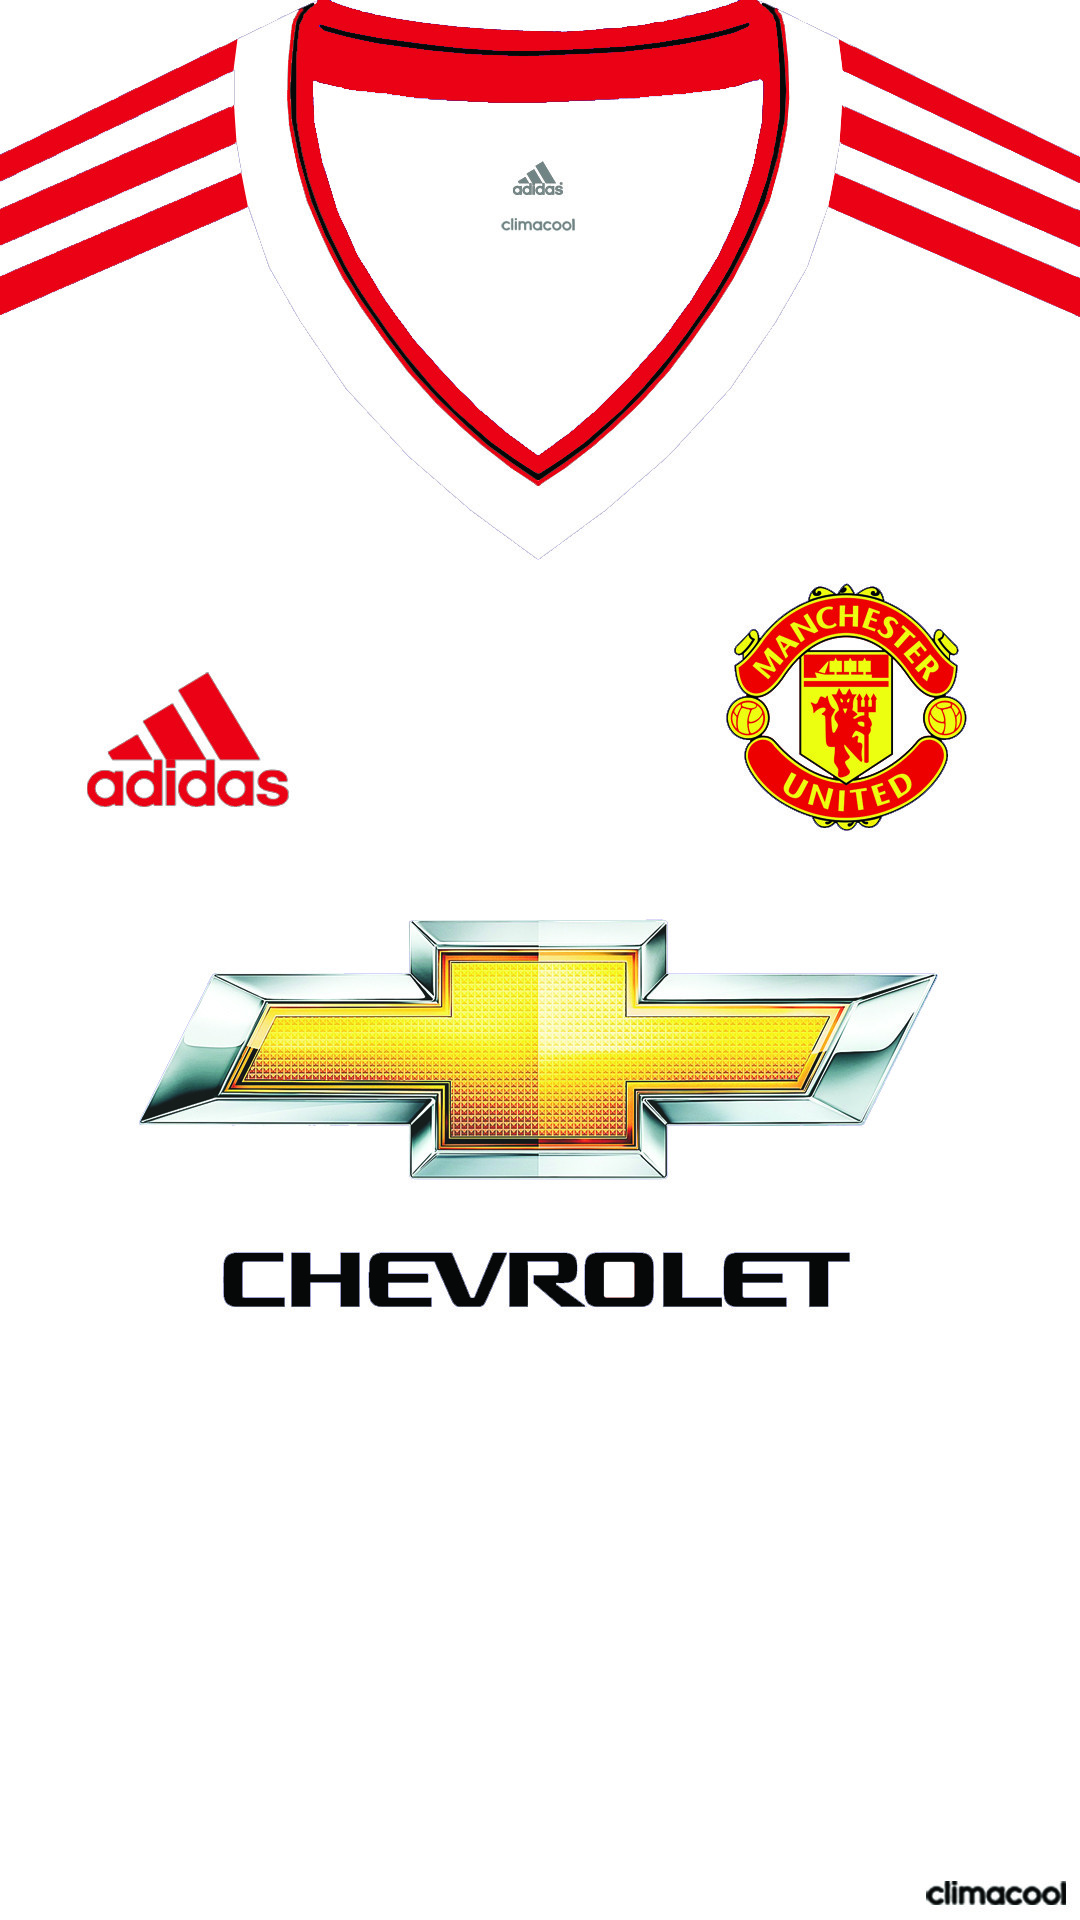 Manchester United Away kit 2015 / 16 iphone 5 5s 6 wallpaper